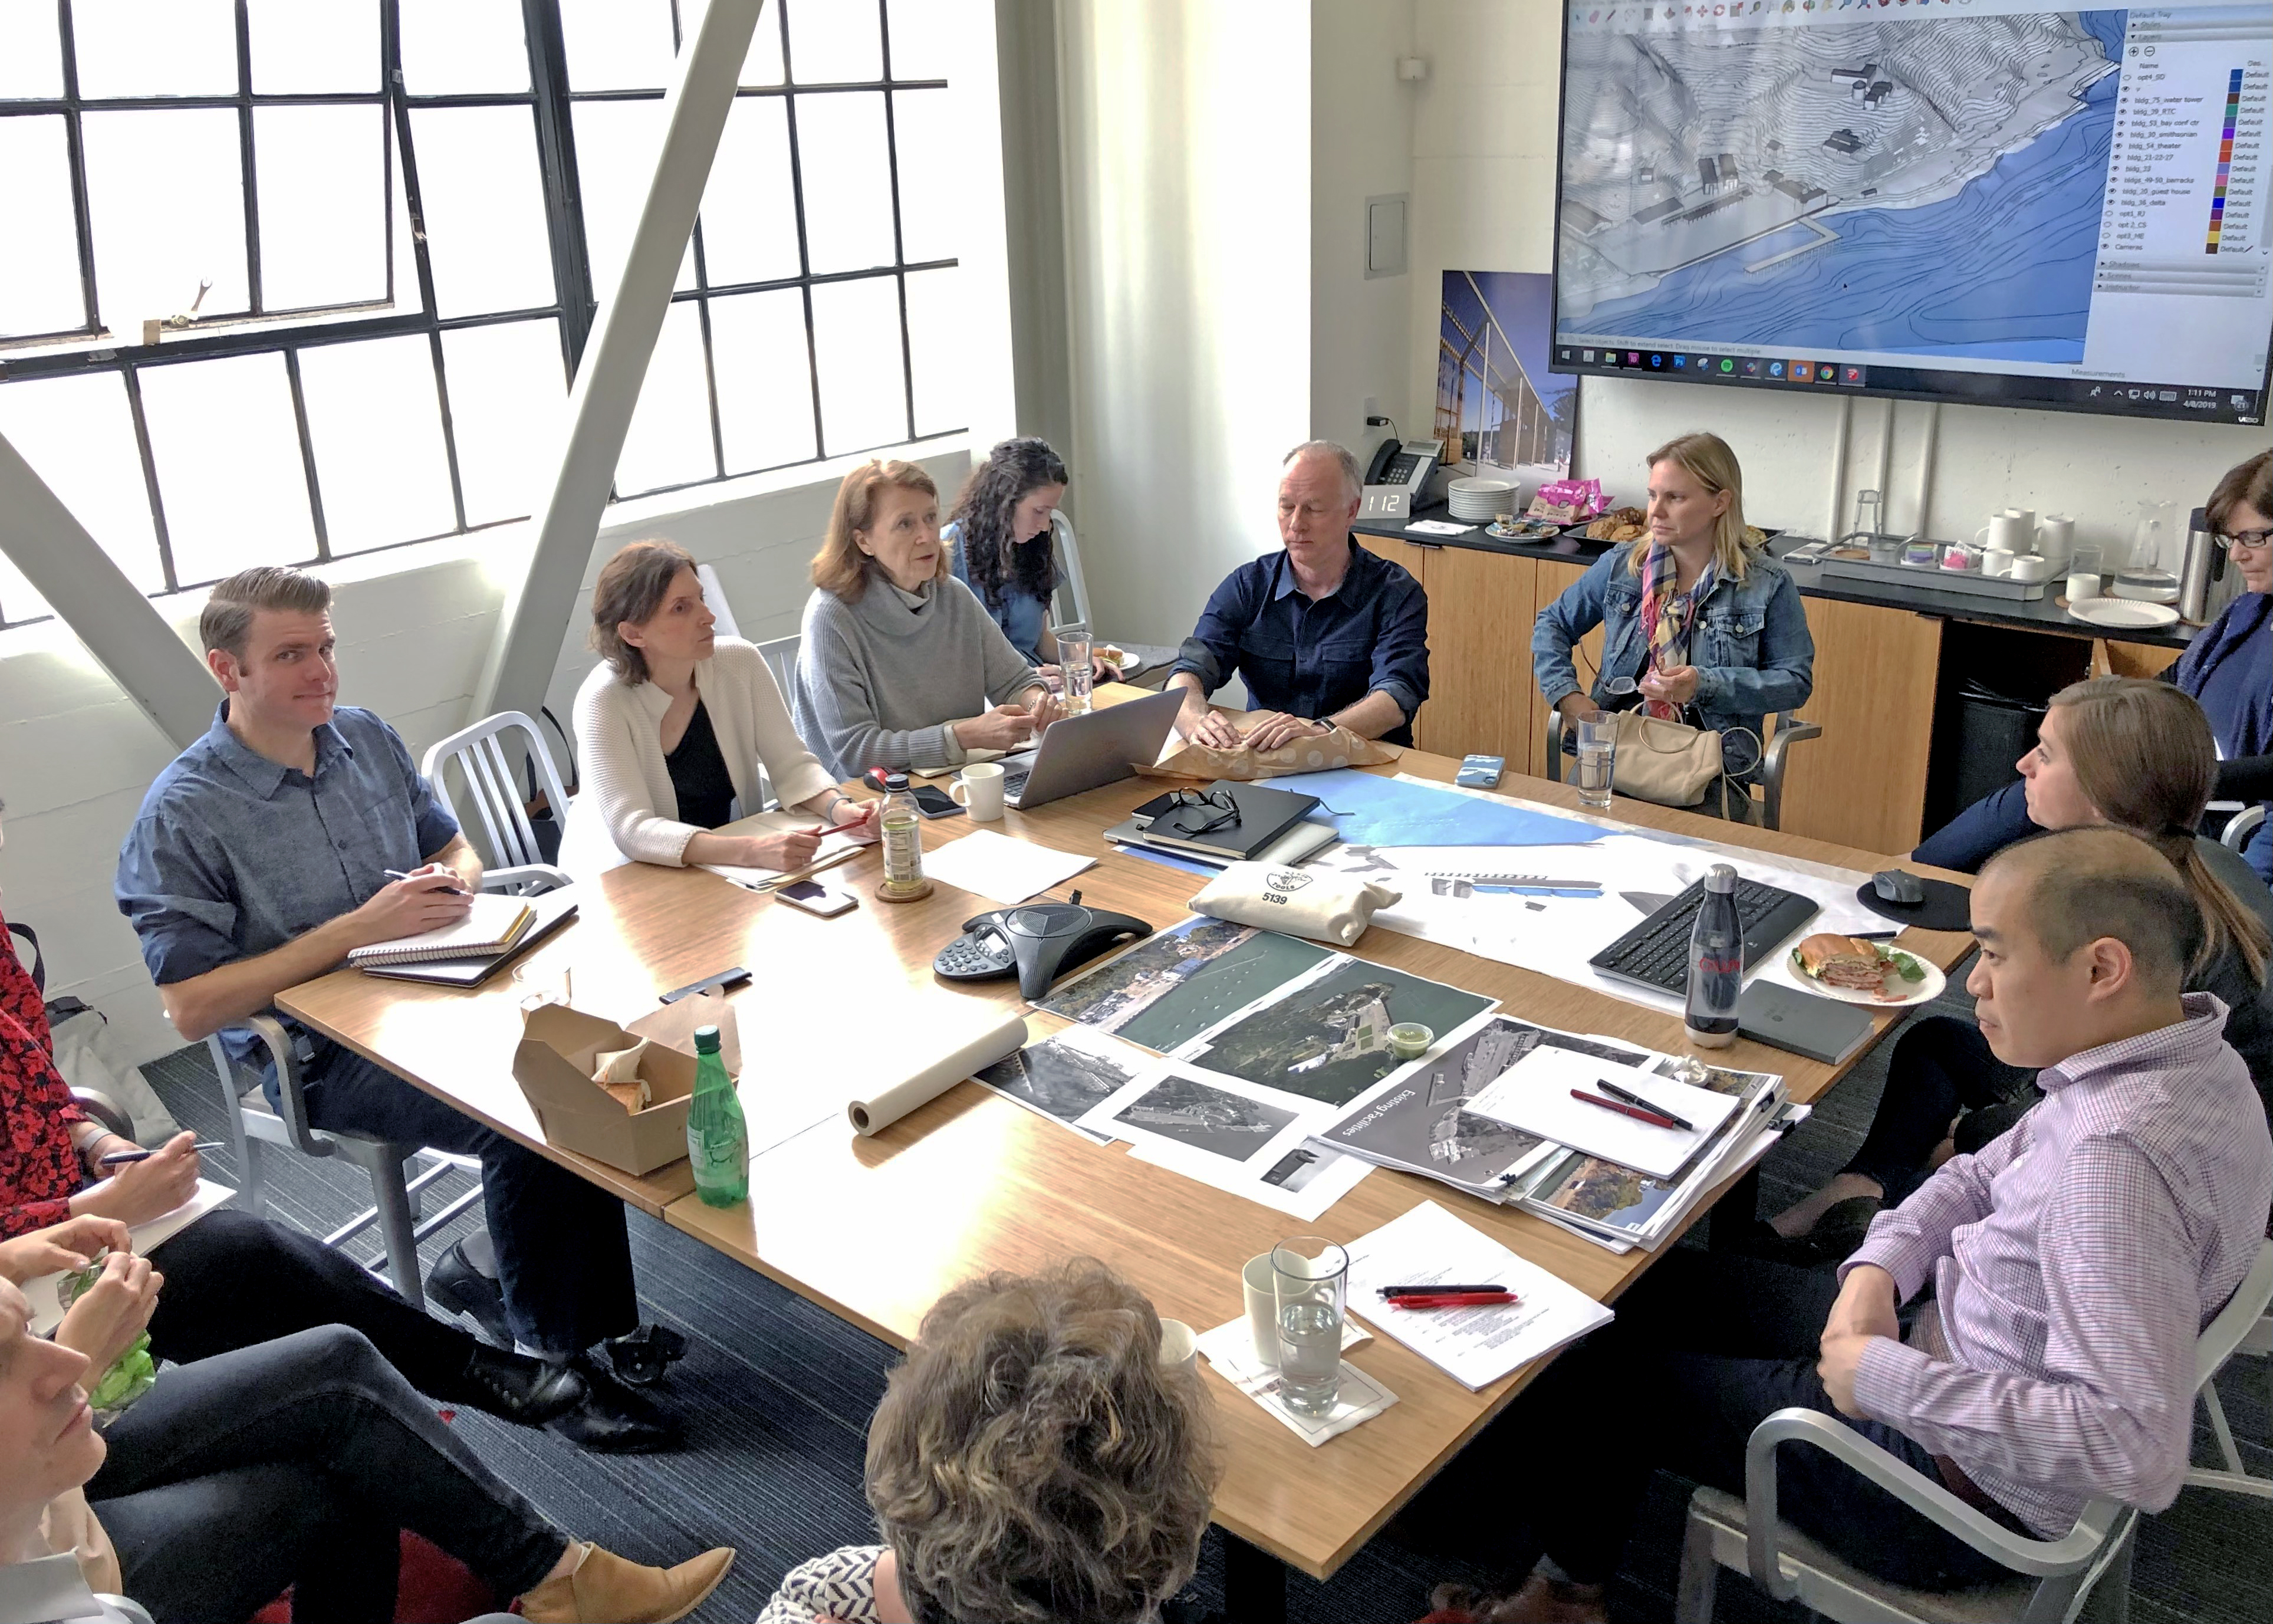 A working group and design team at a project meeting